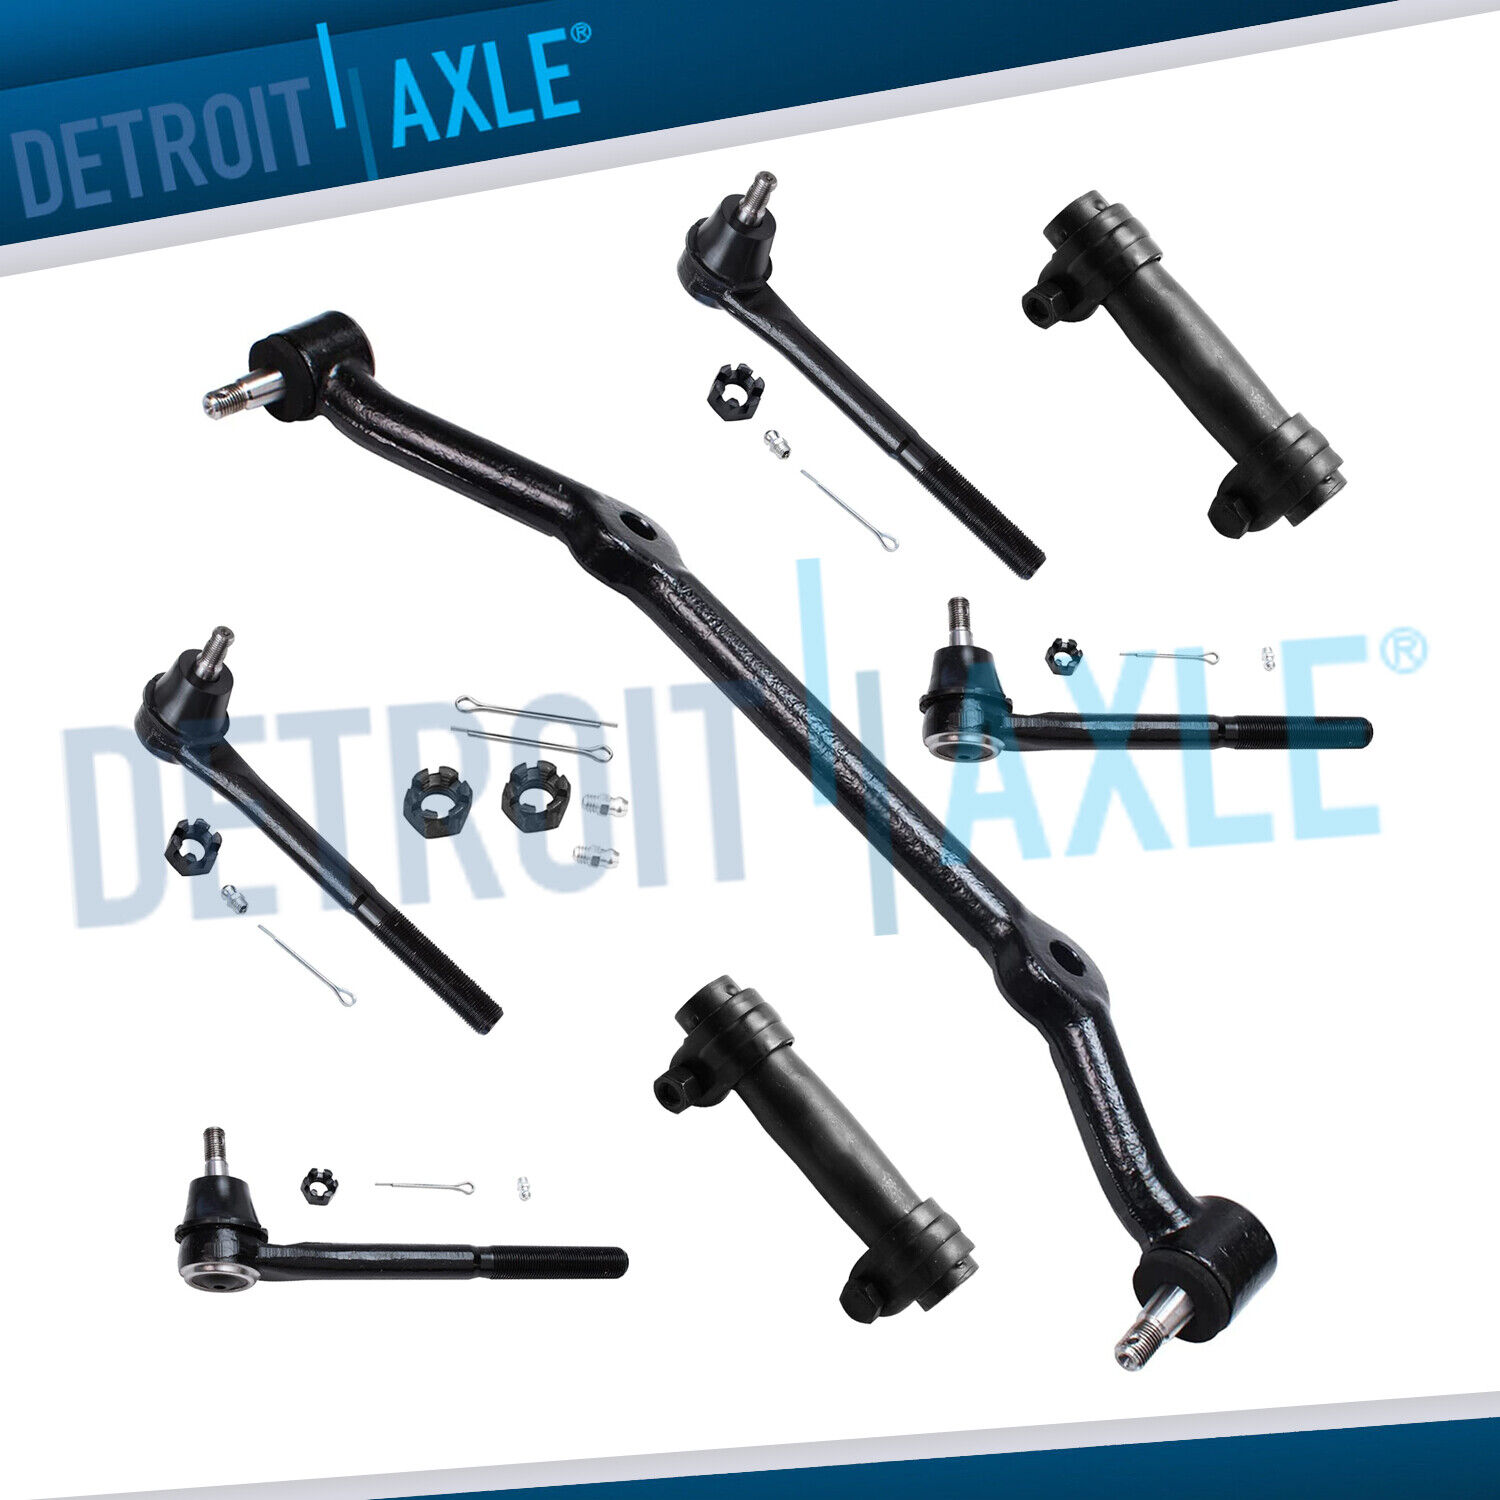 New 7pc Complete Front Suspension Kit for Chevrolet Blazer S10 Jimmy 2WD